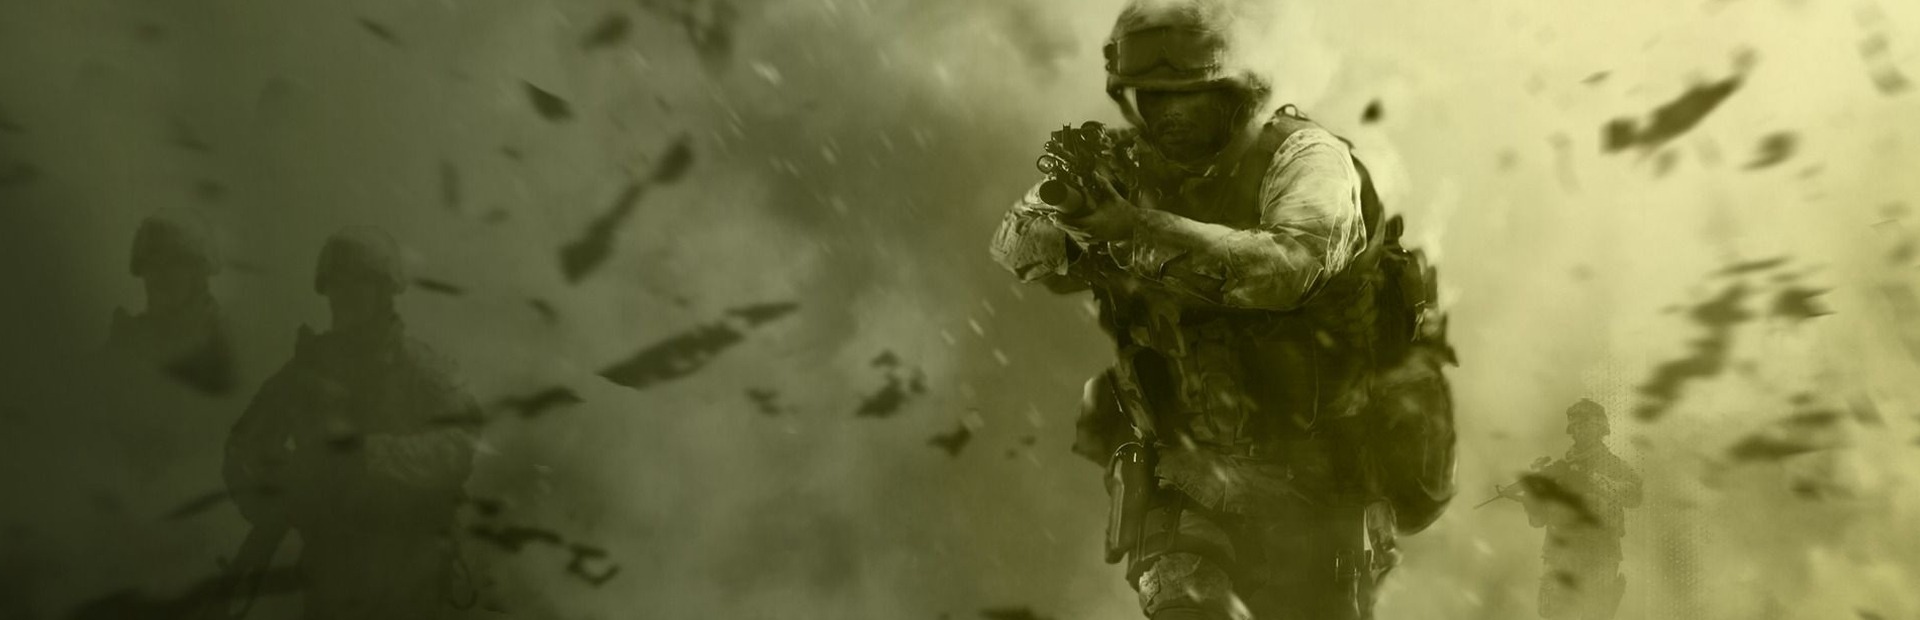 Banner Call of Duty: Modern Warfare 2 Campaign Remastered